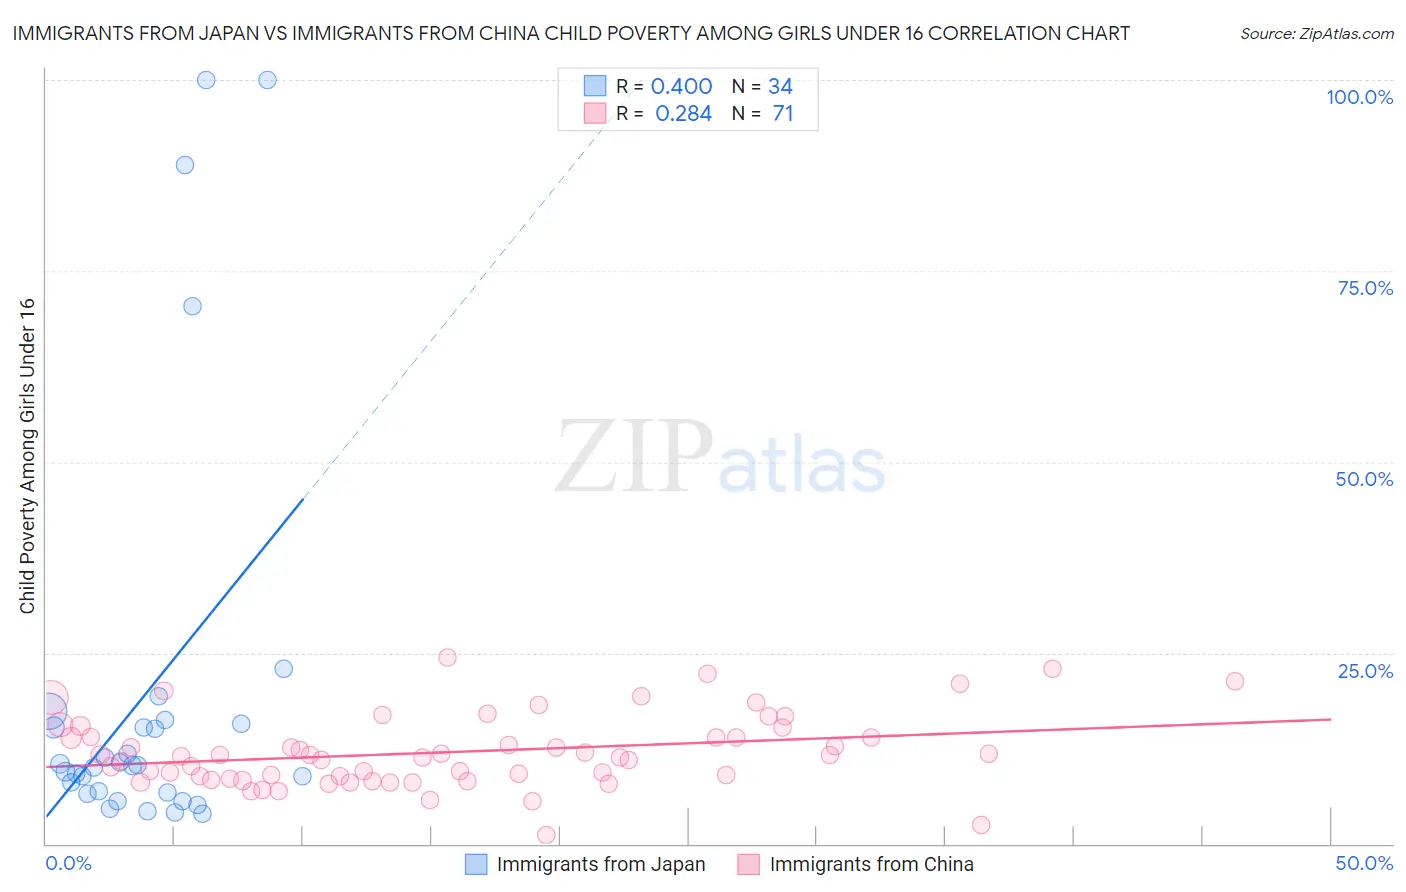 Immigrants from Japan vs Immigrants from China Child Poverty Among Girls Under 16